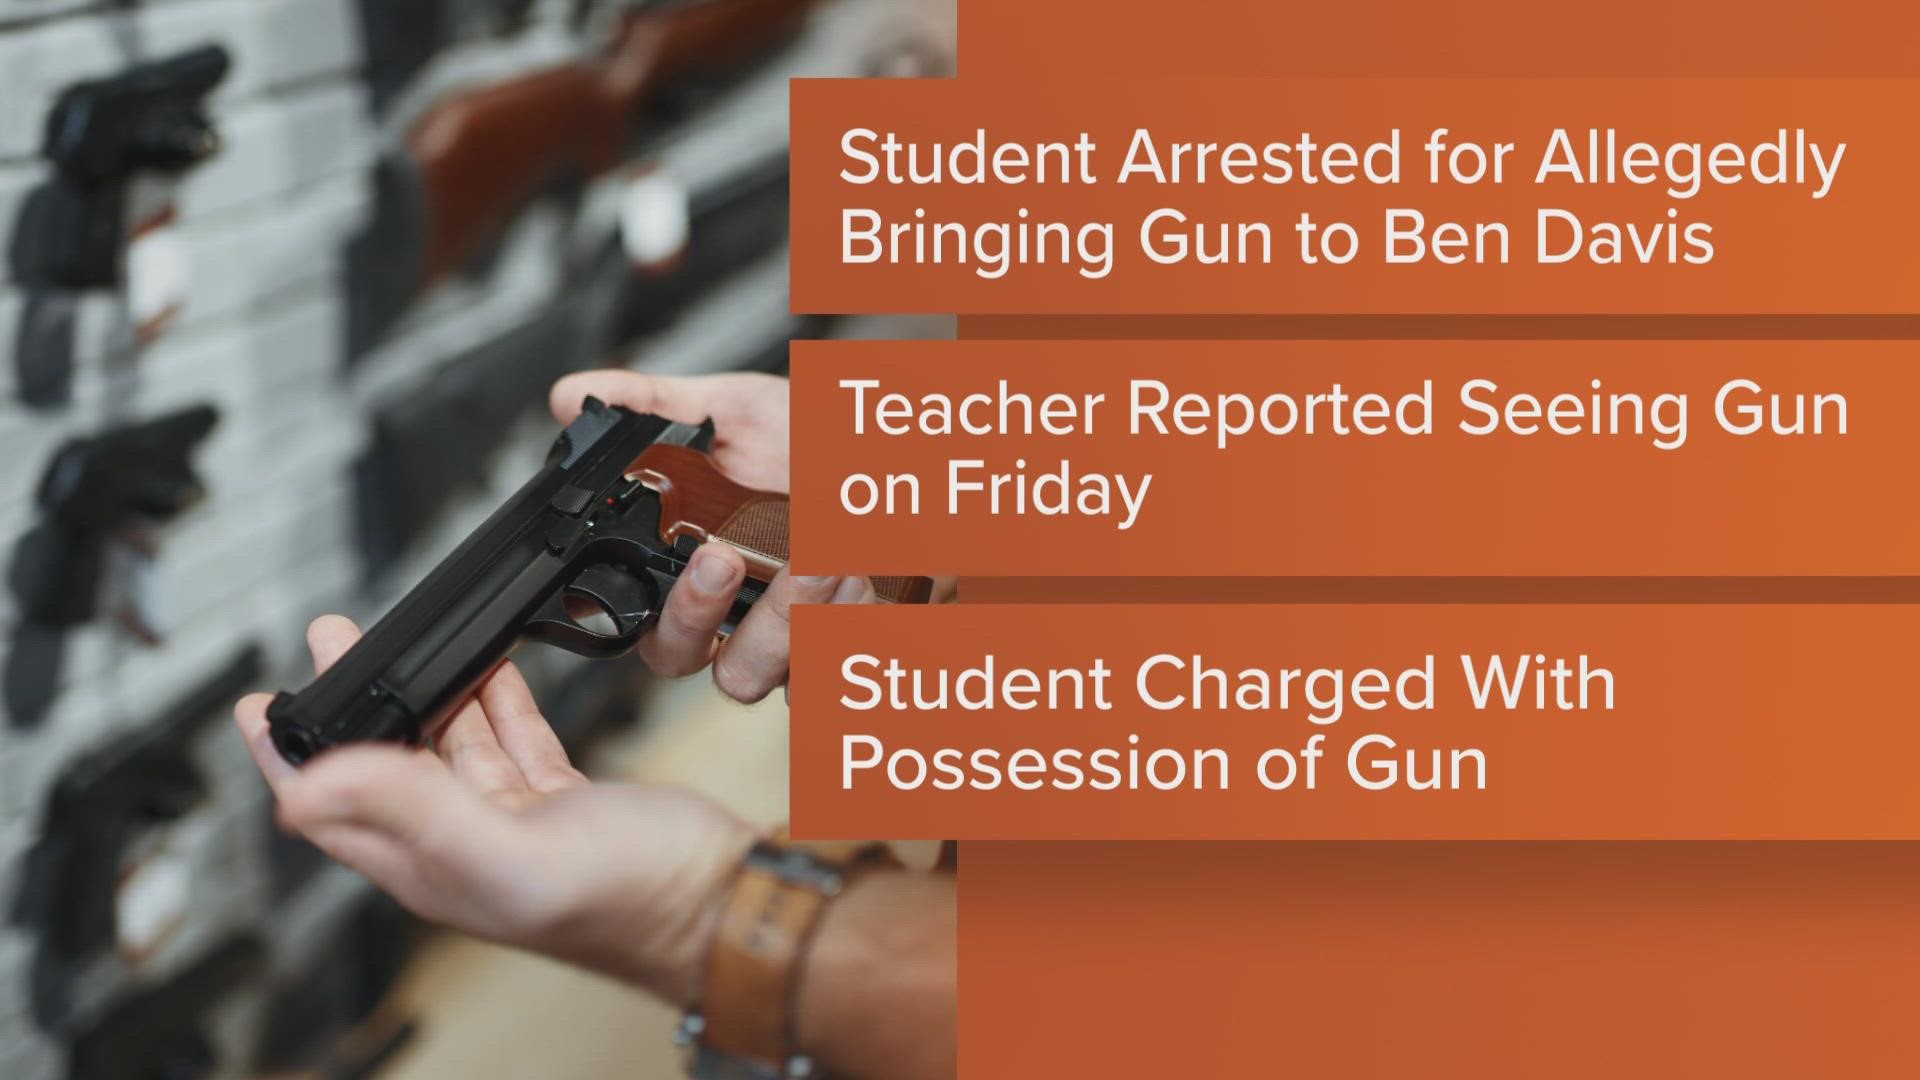 The student is being charged with possession of a gun on school property.